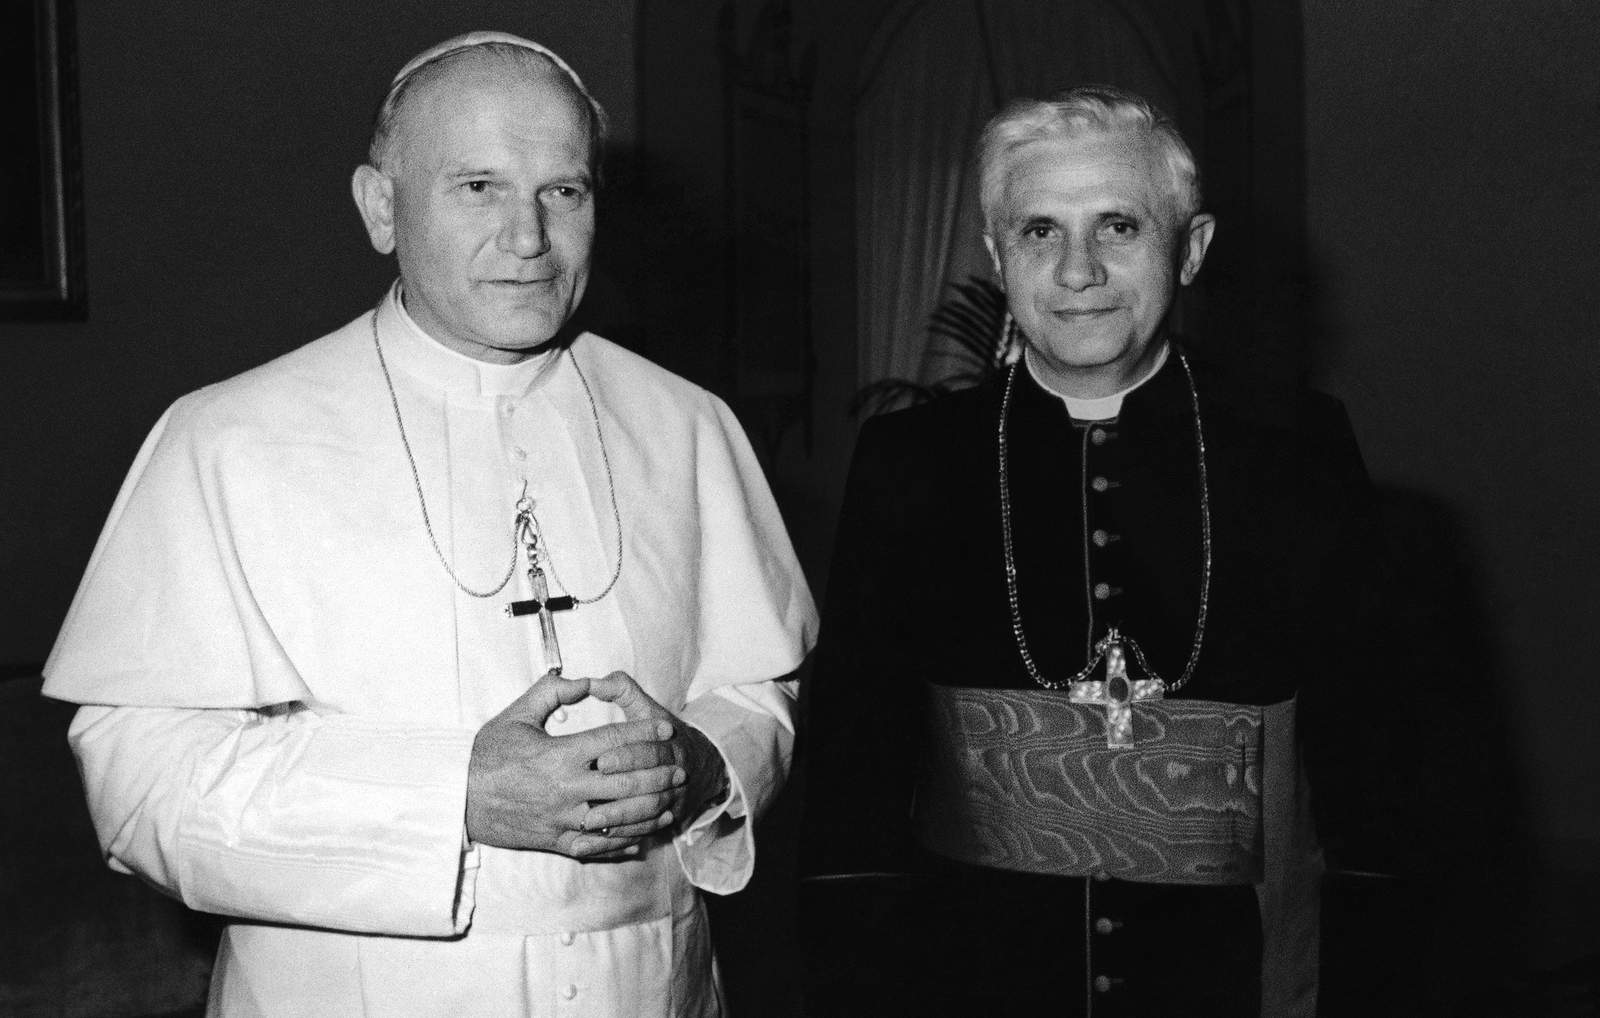 St John Paul II honored as Poland sees new abuse allegations